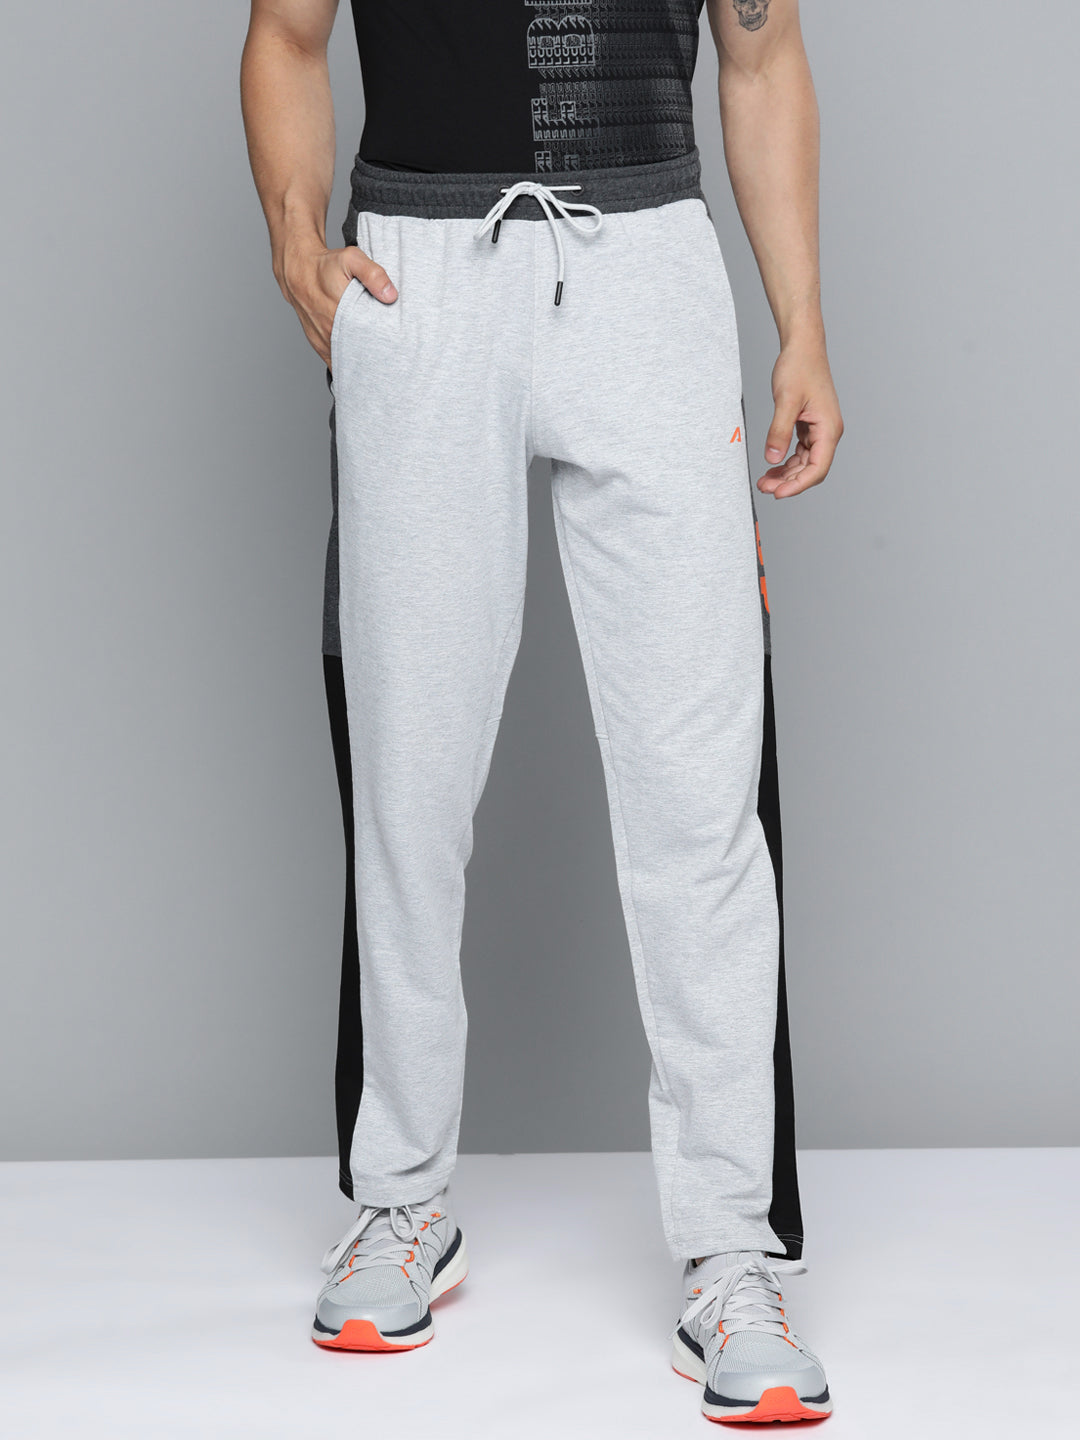 Buy PERF Women Regular fit Cotton Solid Track pants - Grey Online at 50%  off. |Paytm Mall